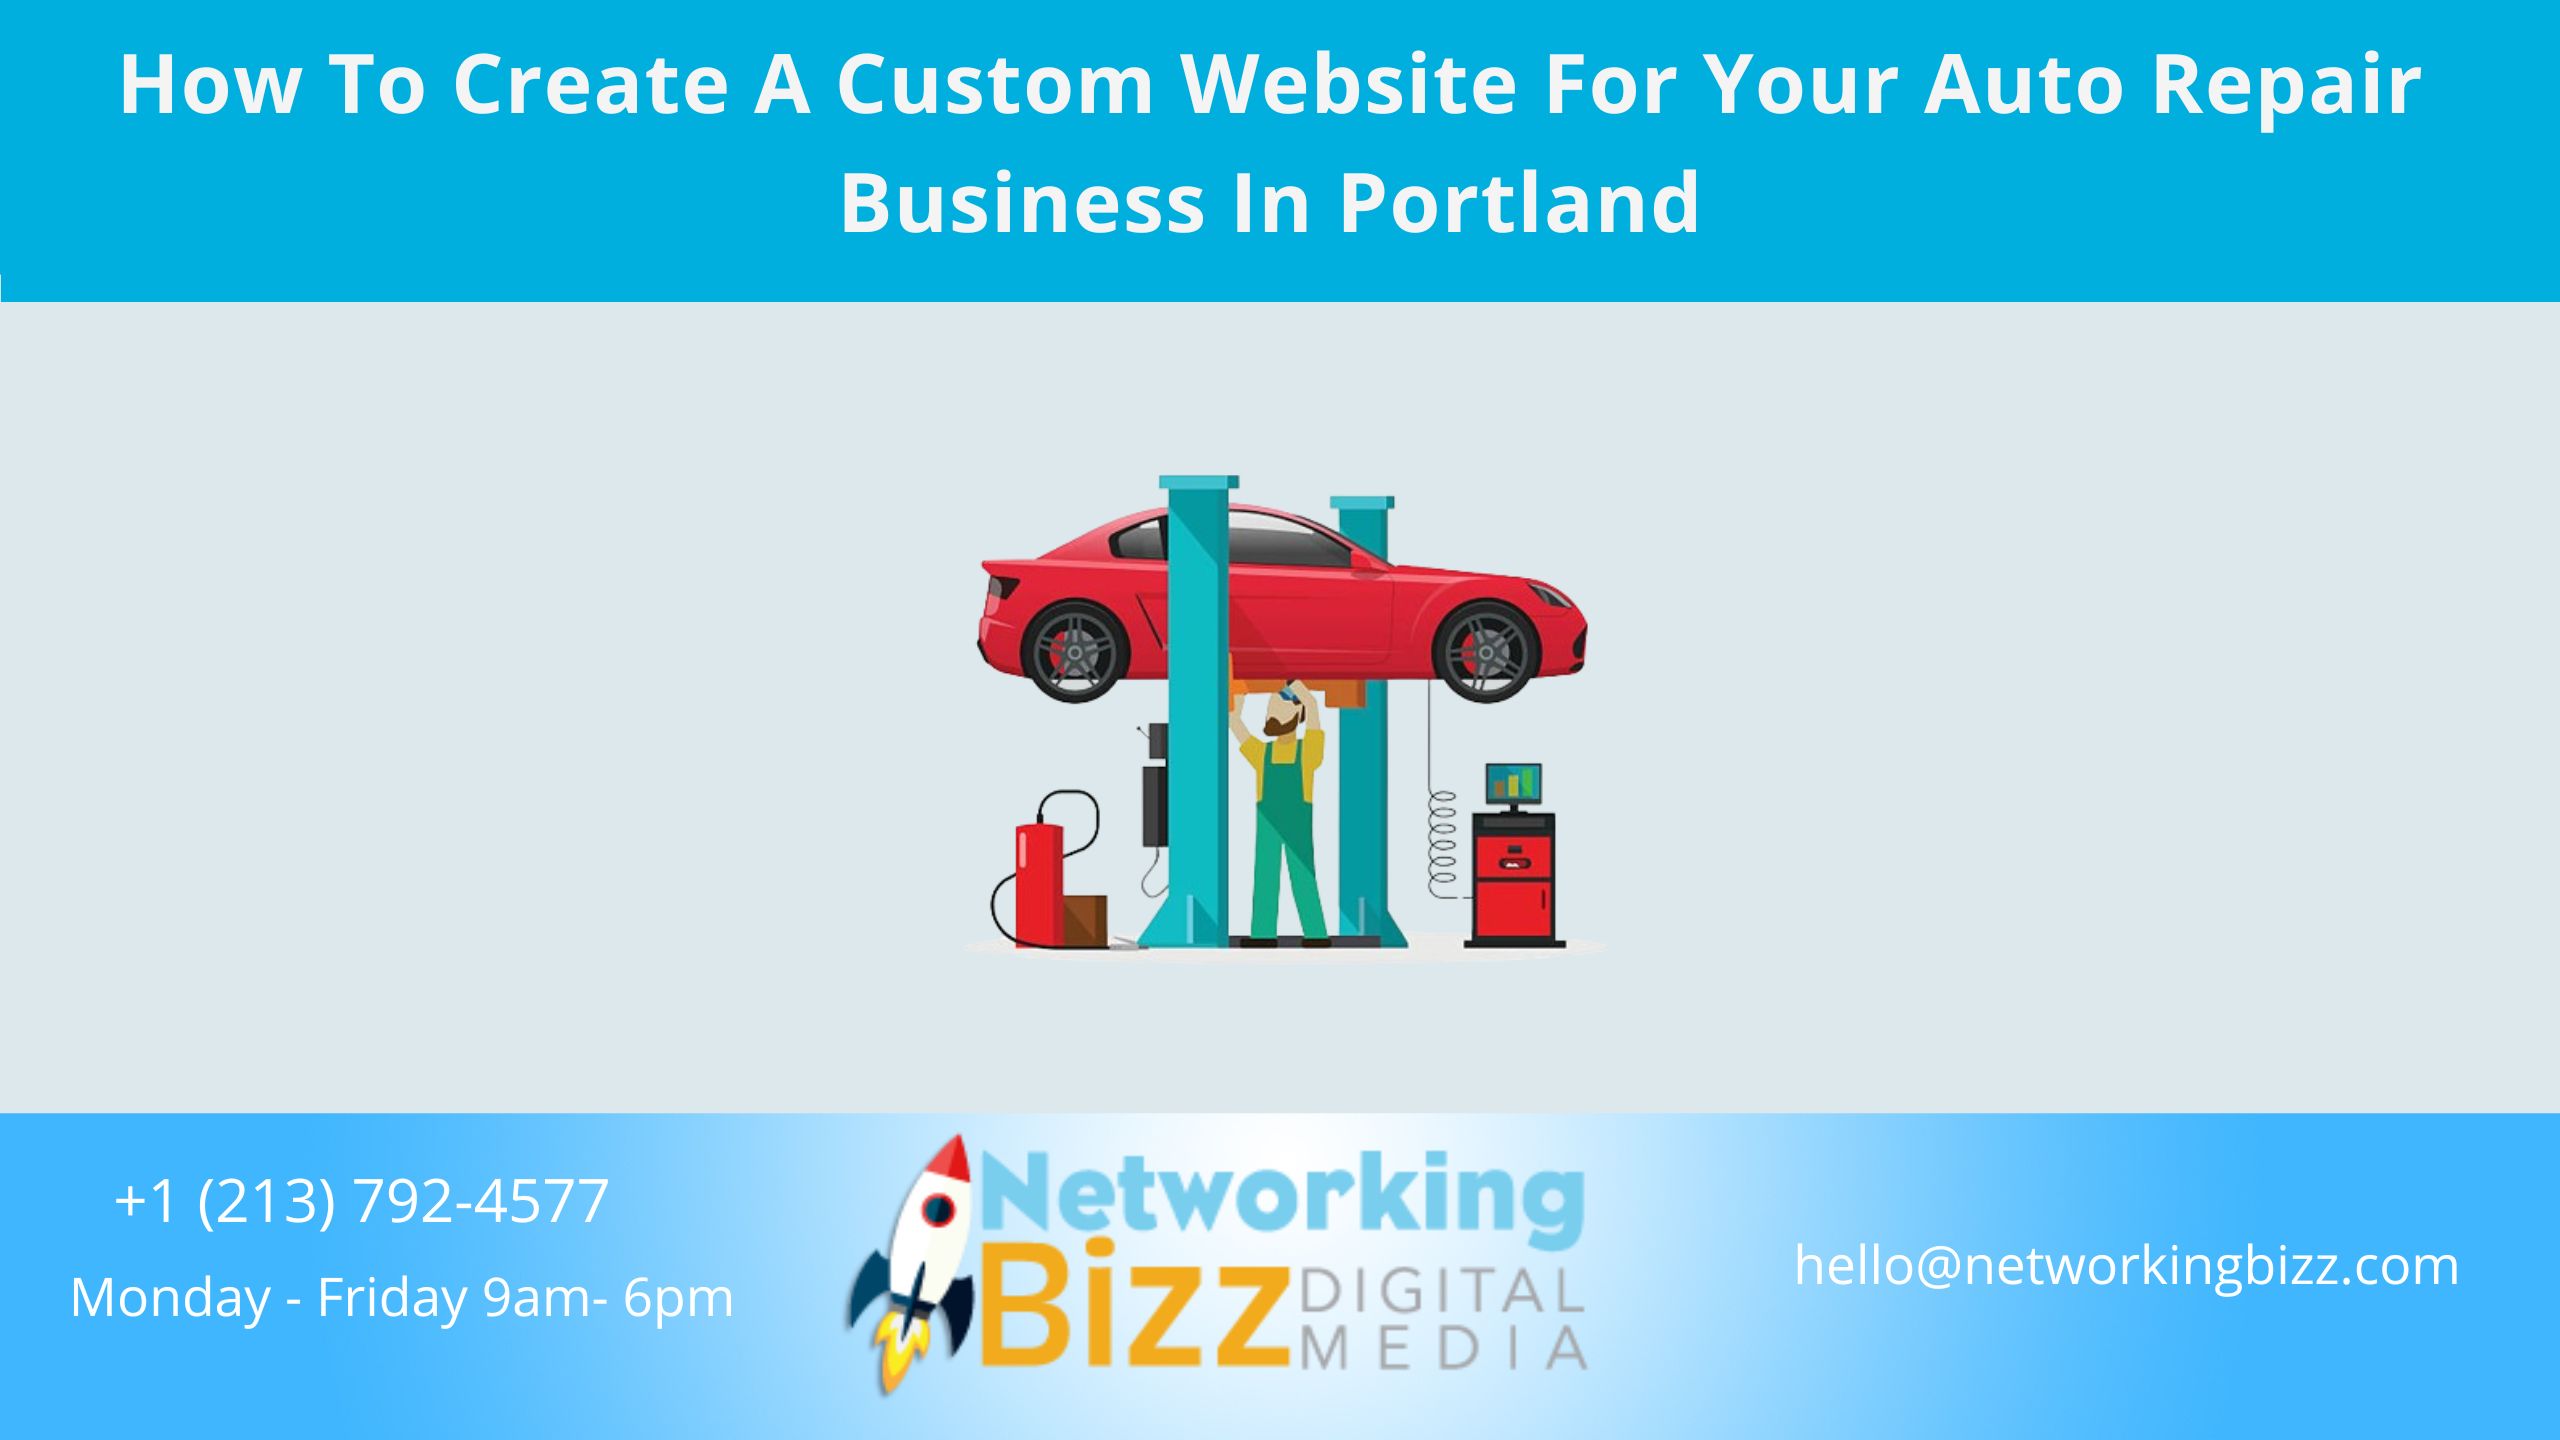 How To Create A Custom Website For Your Auto Repair Business In Portland